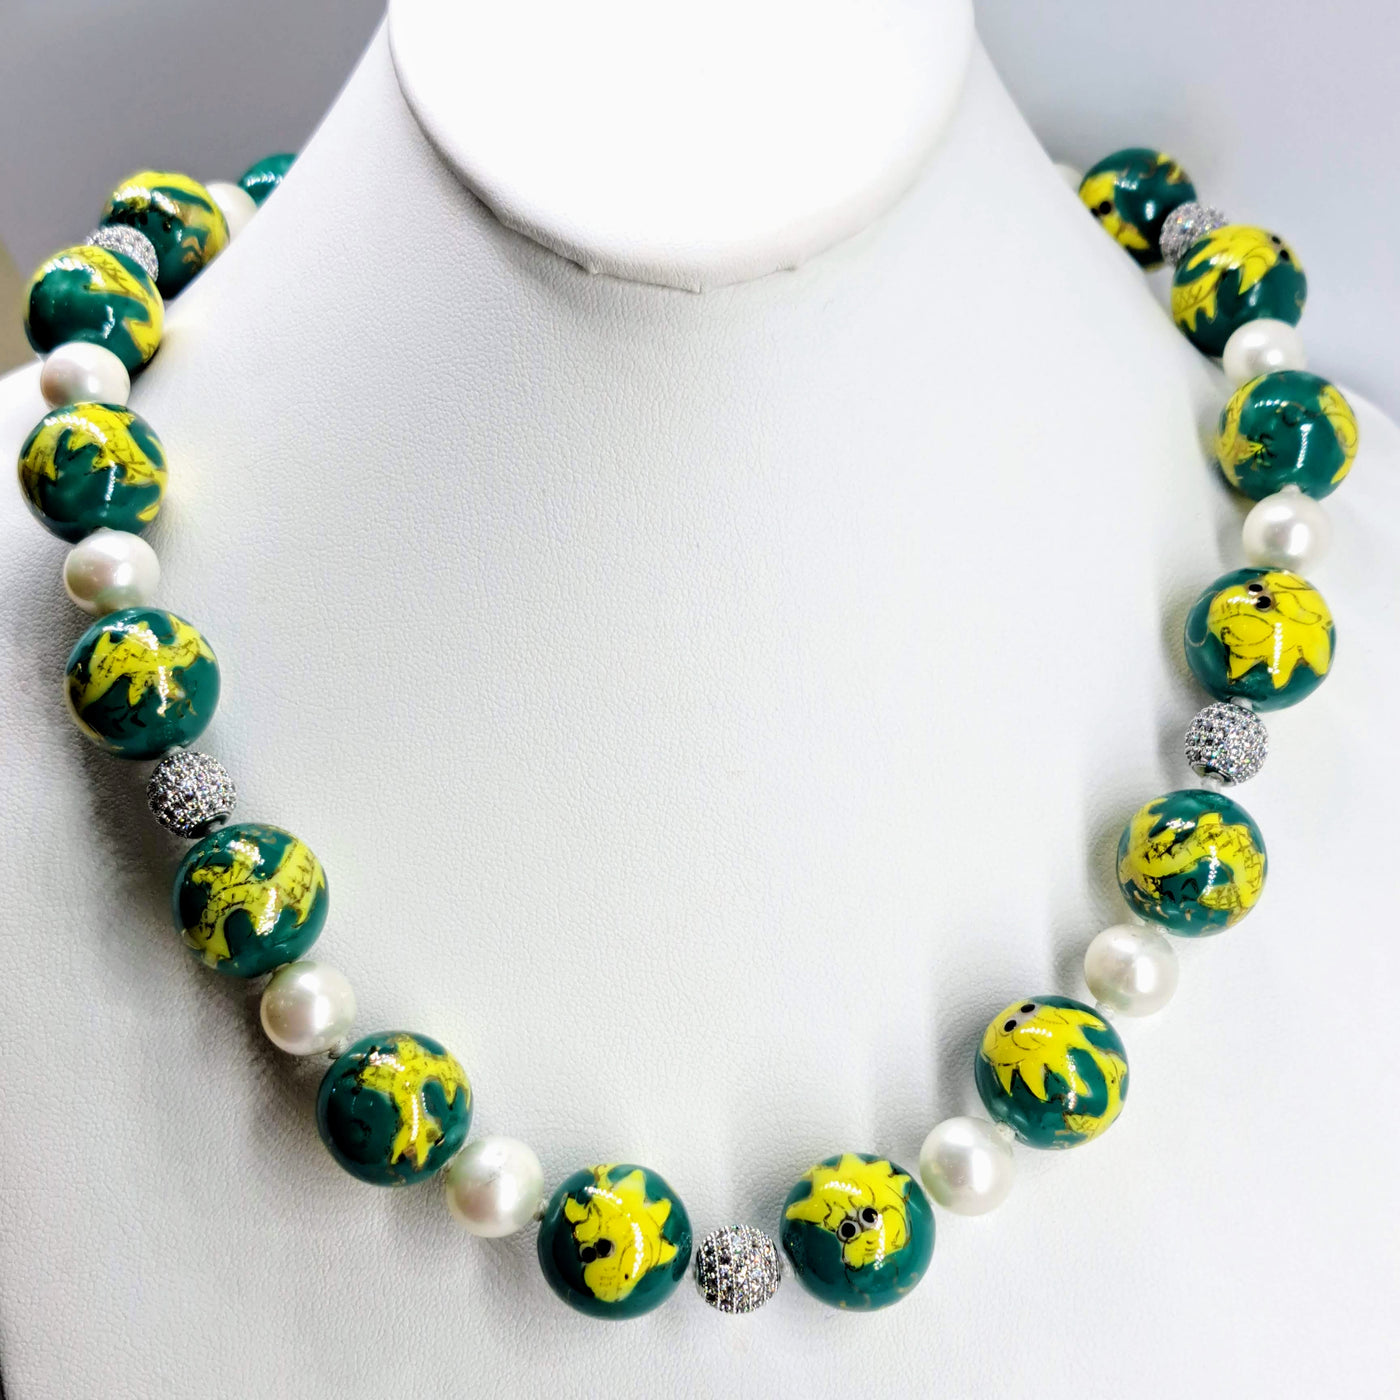 "Green Dragon" 22" Necklace - Porcelain, Pearls, Crystal Pave', Sterling, Decorative Clasp